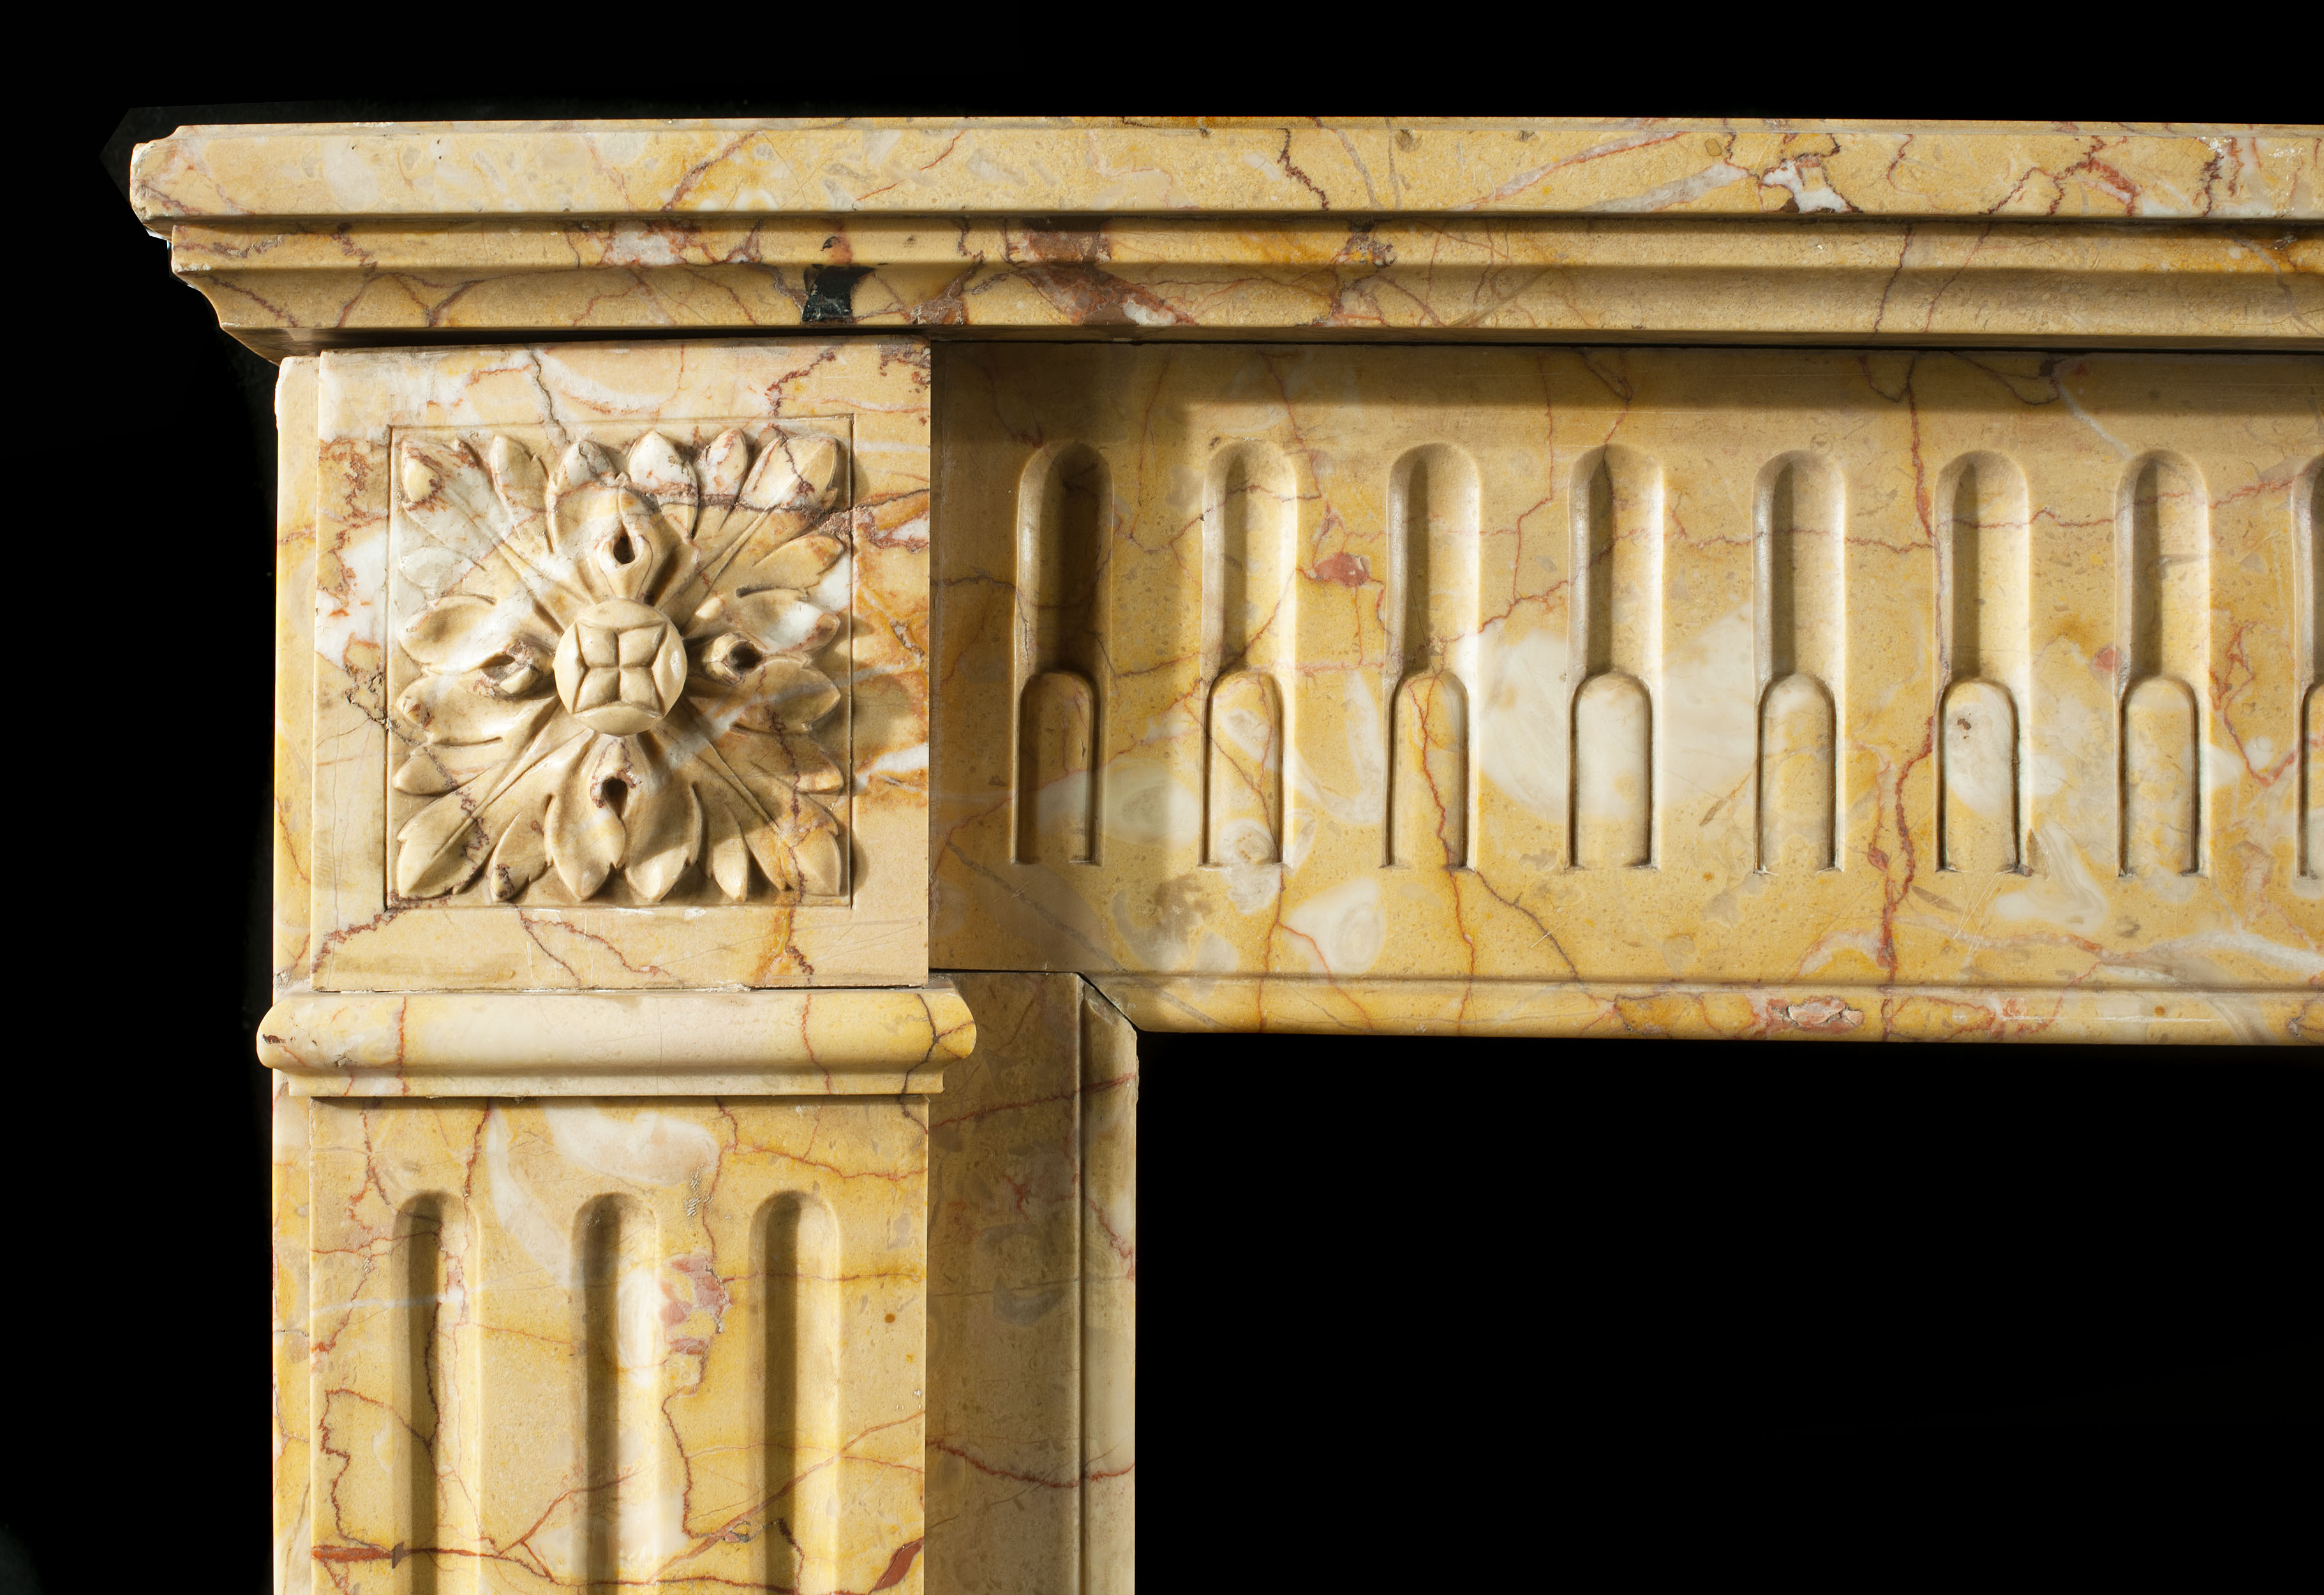 French Regency style marble  fireplace mantel  